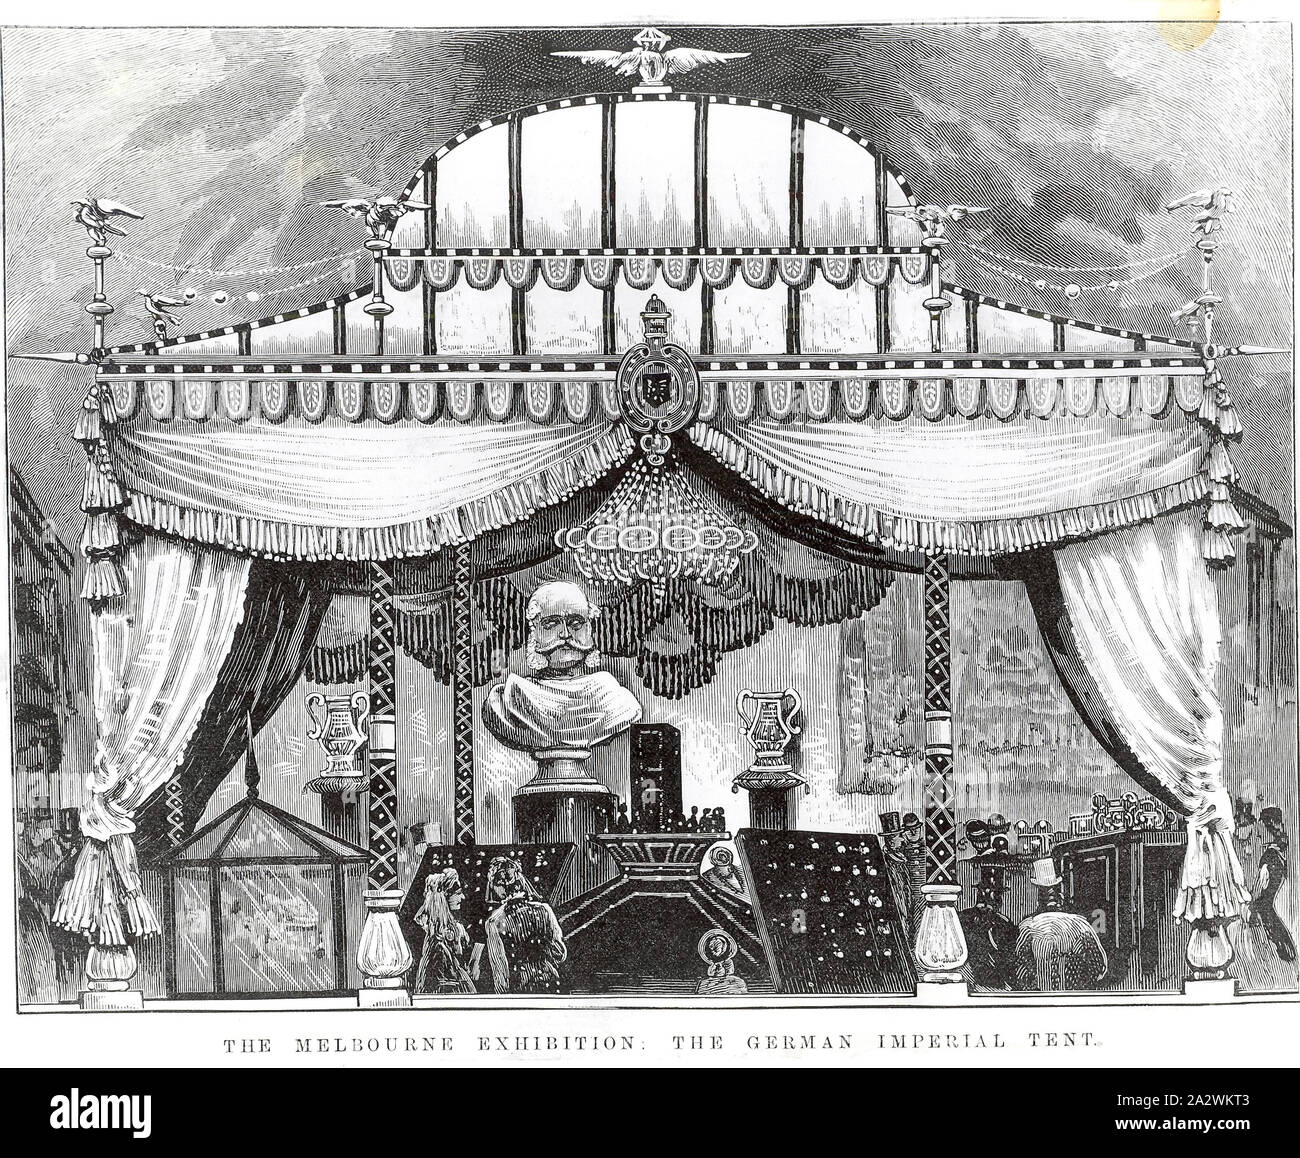 Etching - German Imperial Tent, 1880, Photographic copy of an etching of the German Imperial Tent display at the Melbourne International Exhibition, held in the (Royal) Exhibition Building, Melbourne, 1 October 1880 - 30 April 1881. The etching was in Mr M Clarke's Scrapbook No 4, p16. M Clarke was the grandson of William Clarke, Chairman of Commissioners Stock Photo